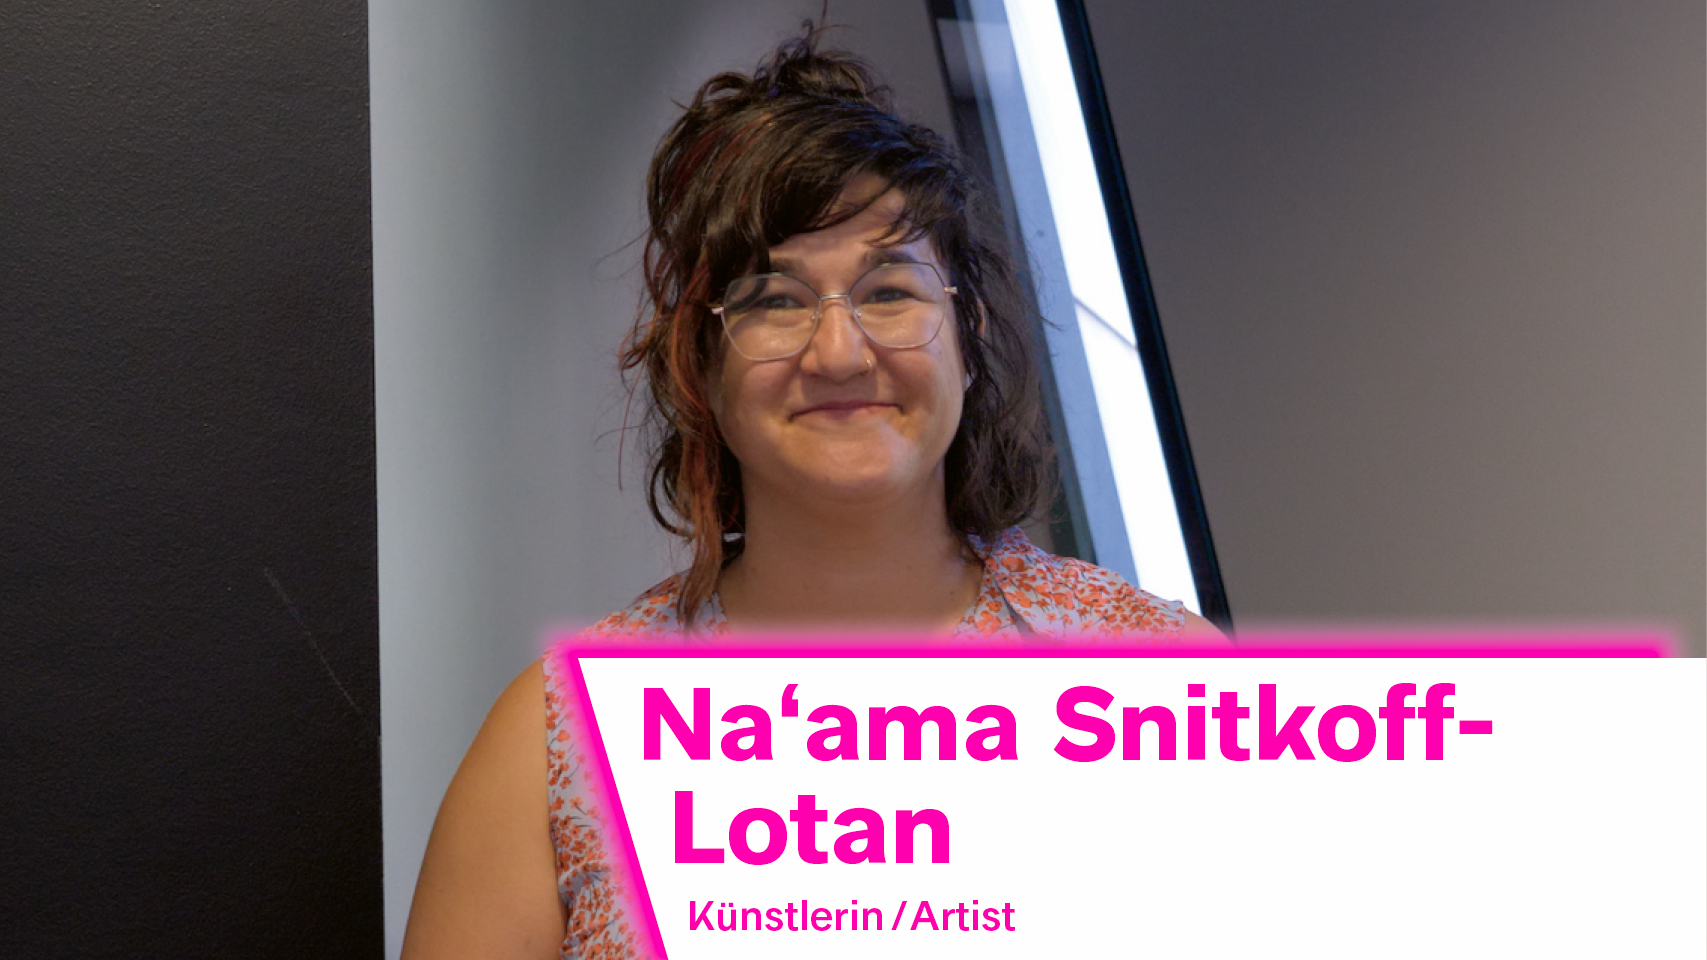 The image shows Israeli artist Na'ama Snitkoff-Lotan. She is wearing a blouse with a colourful design, her brown hair is loosely held together at the back of her head and she is waeting glasses.